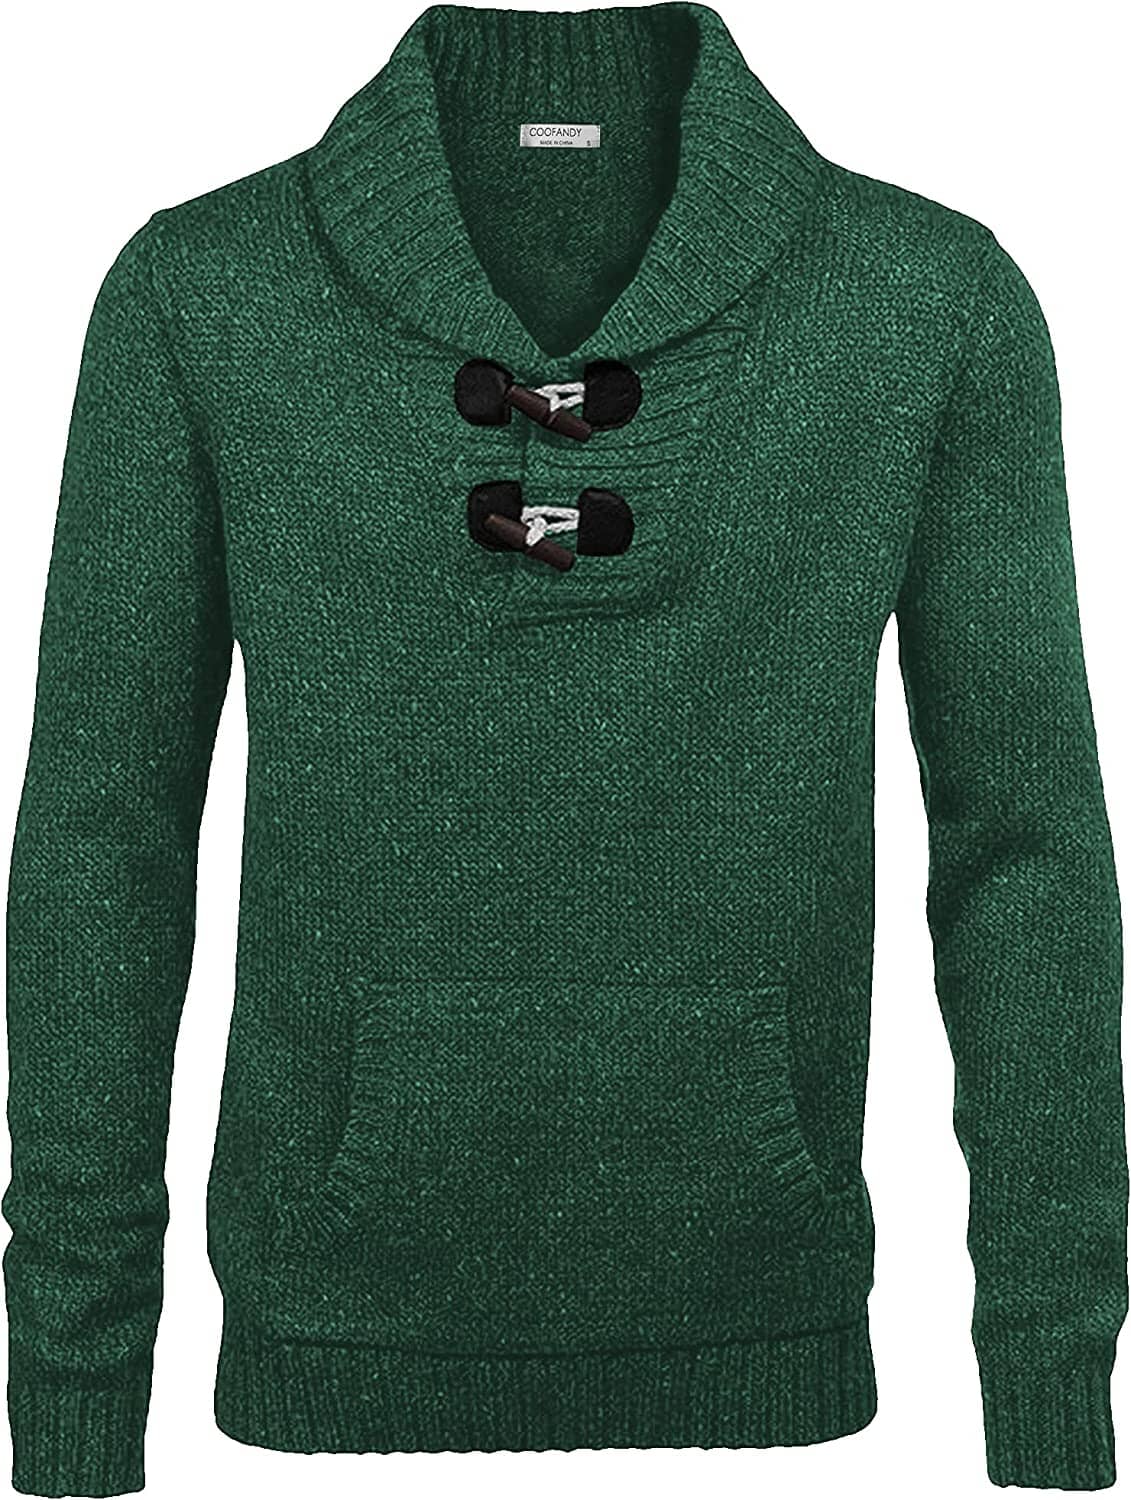 Shawl Collar Pullover Knit Sweaters with Pockets (US Only) Sweaters COOFANDY Store Dark Green S 